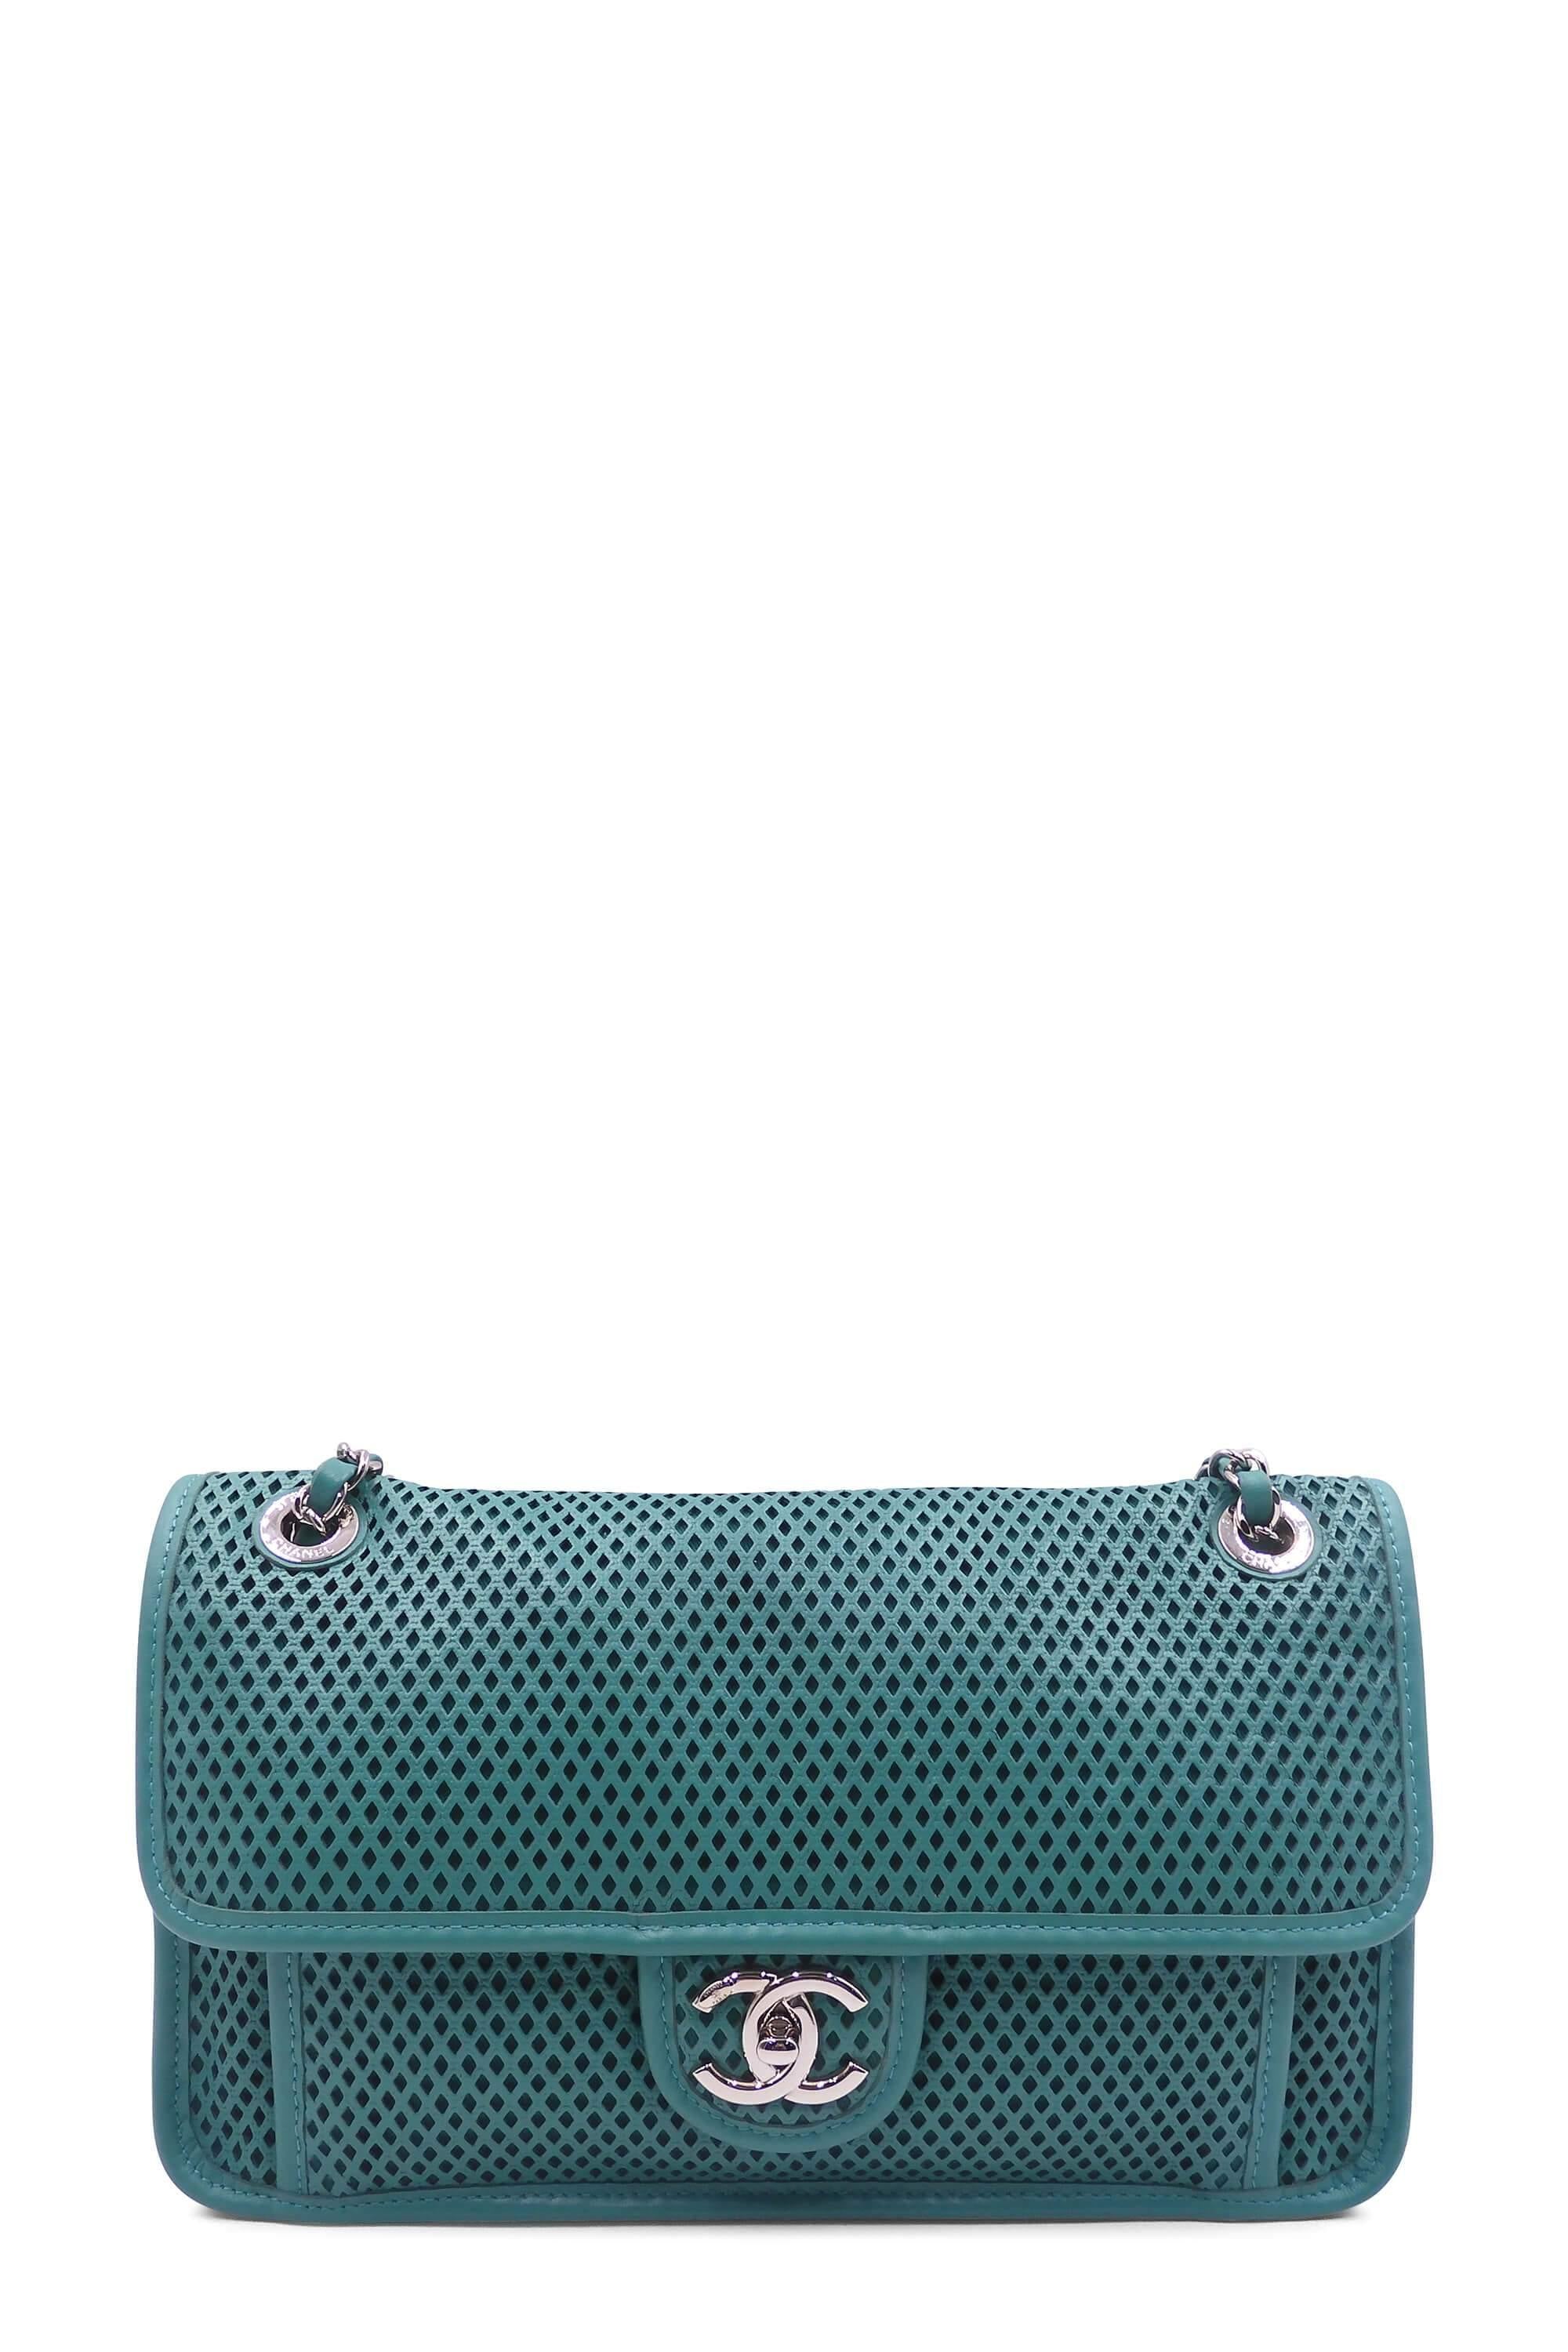 Perforated Up in The Air Flap Bag Teal